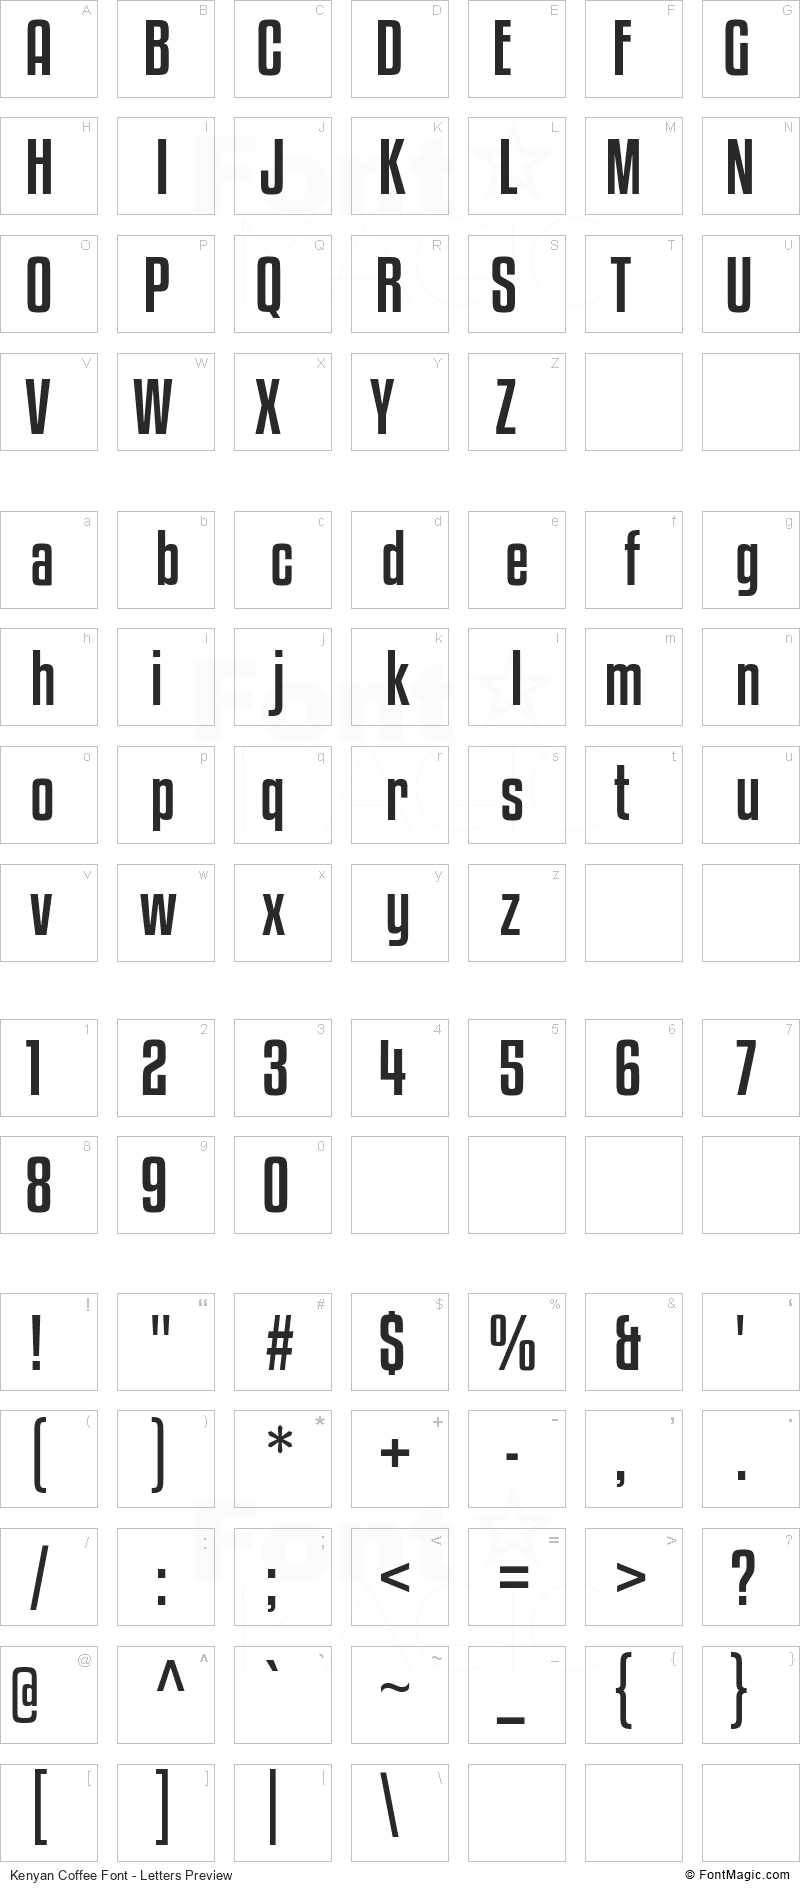 Kenyan Coffee Font - All Latters Preview Chart